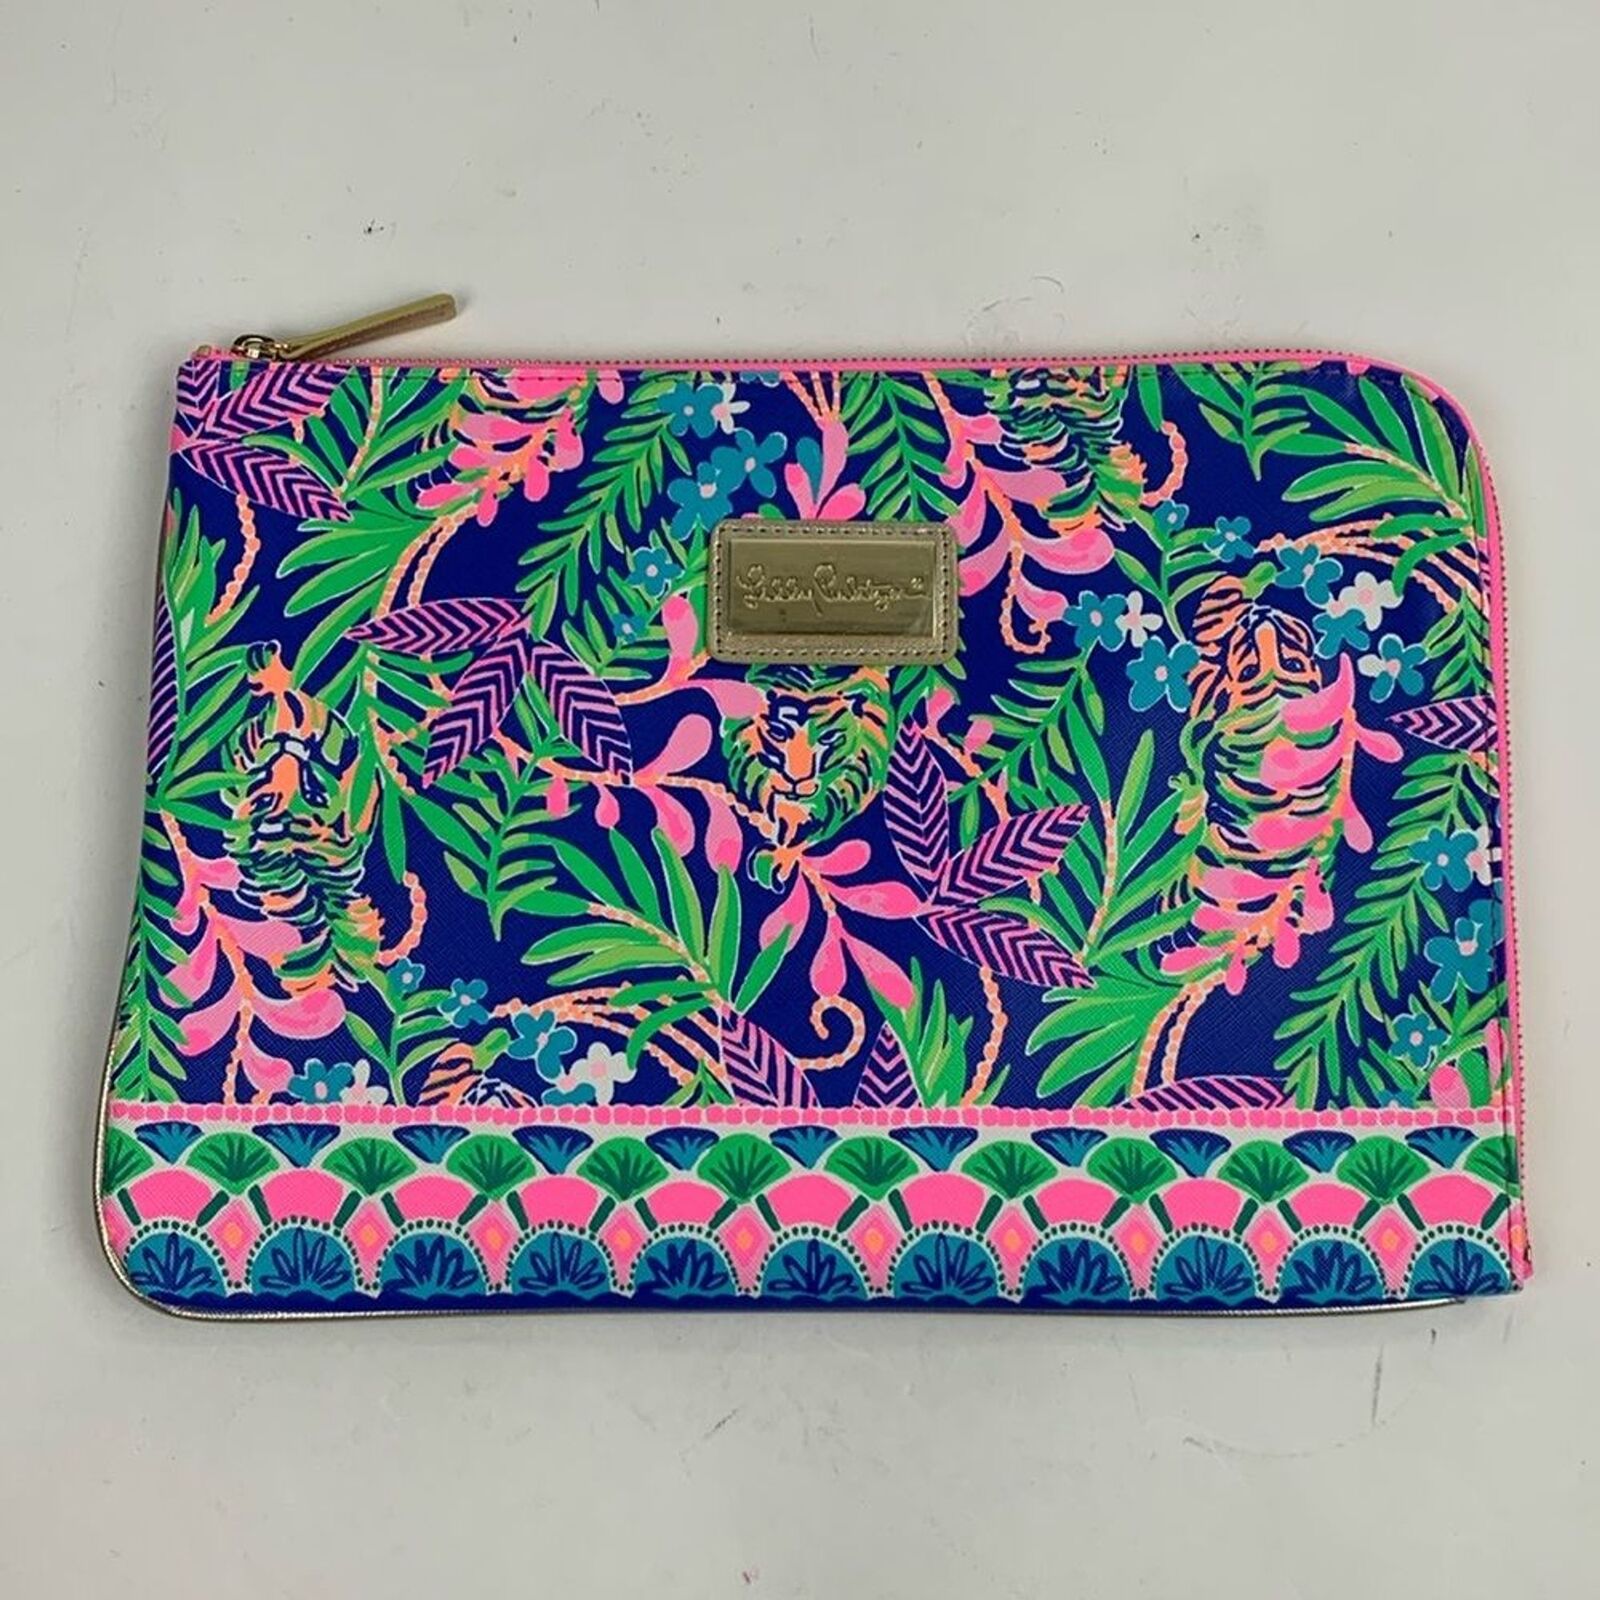 Lilly Pulitzer Media IPad Case with matching pouch bag Gold Zip close New NWOT